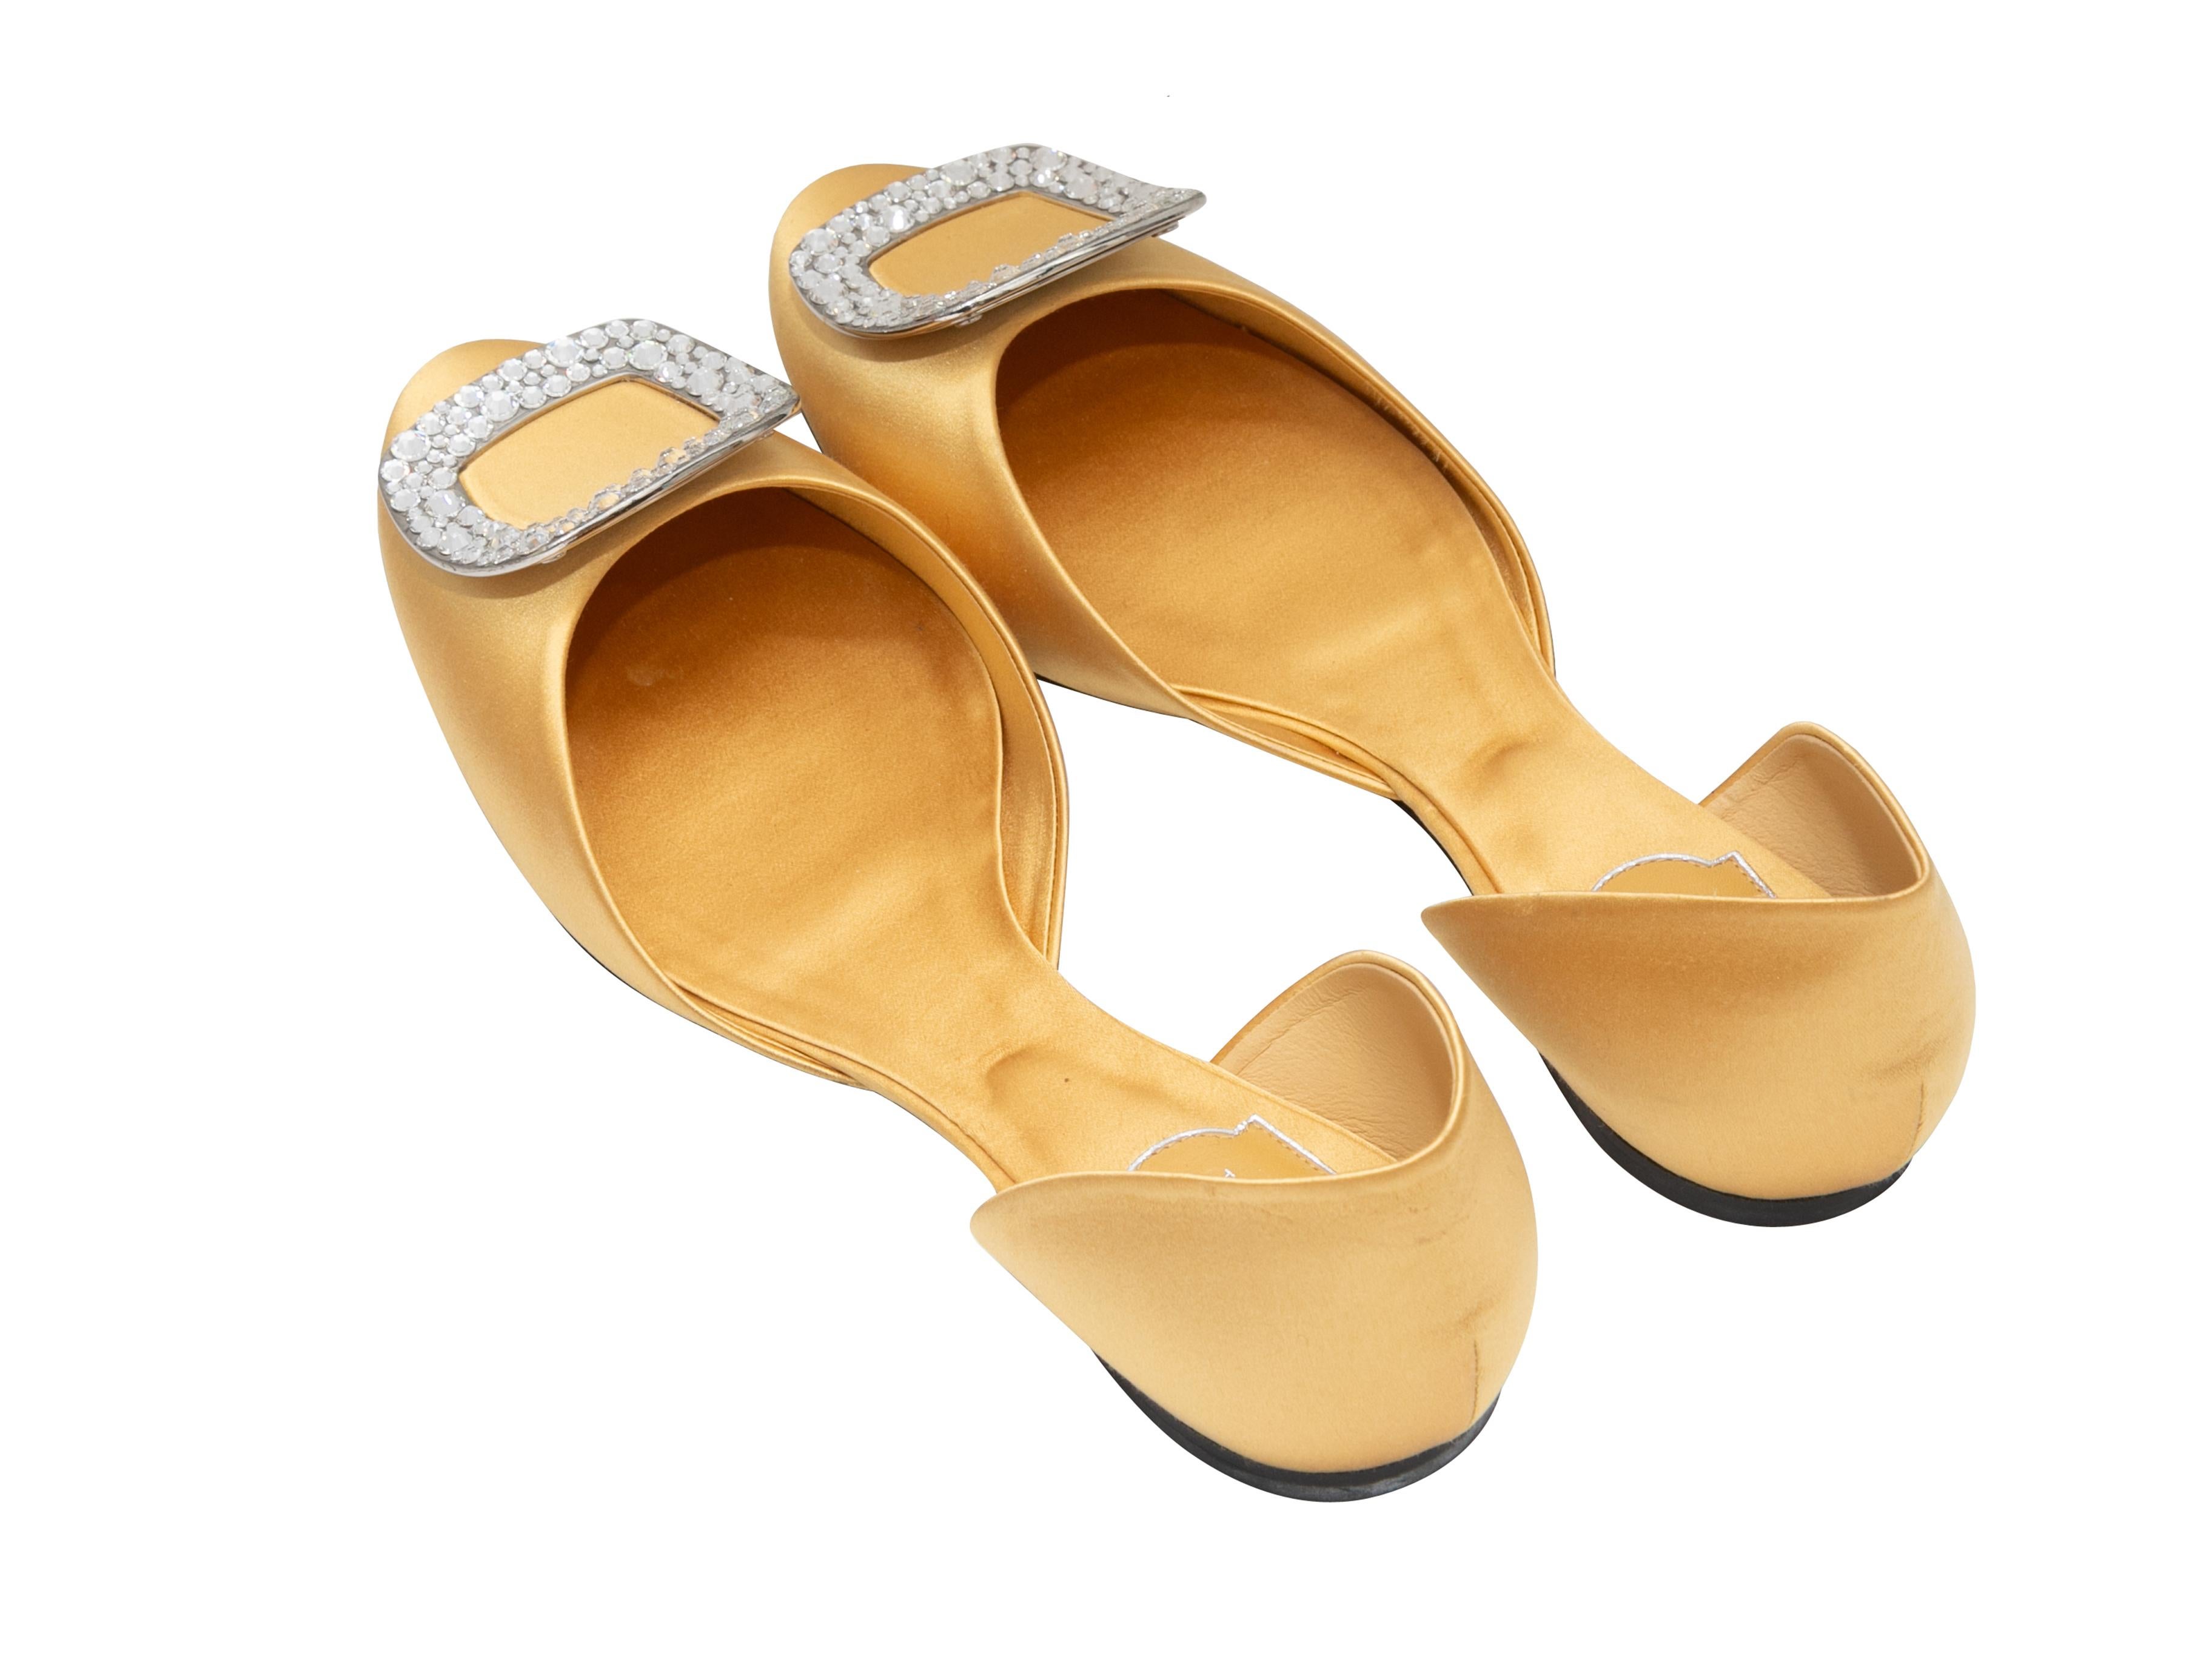 Yellow satin d'Orsay ballet flats by Roger Vivier. Crystal-embellished buckle adornments at toes. 0.25